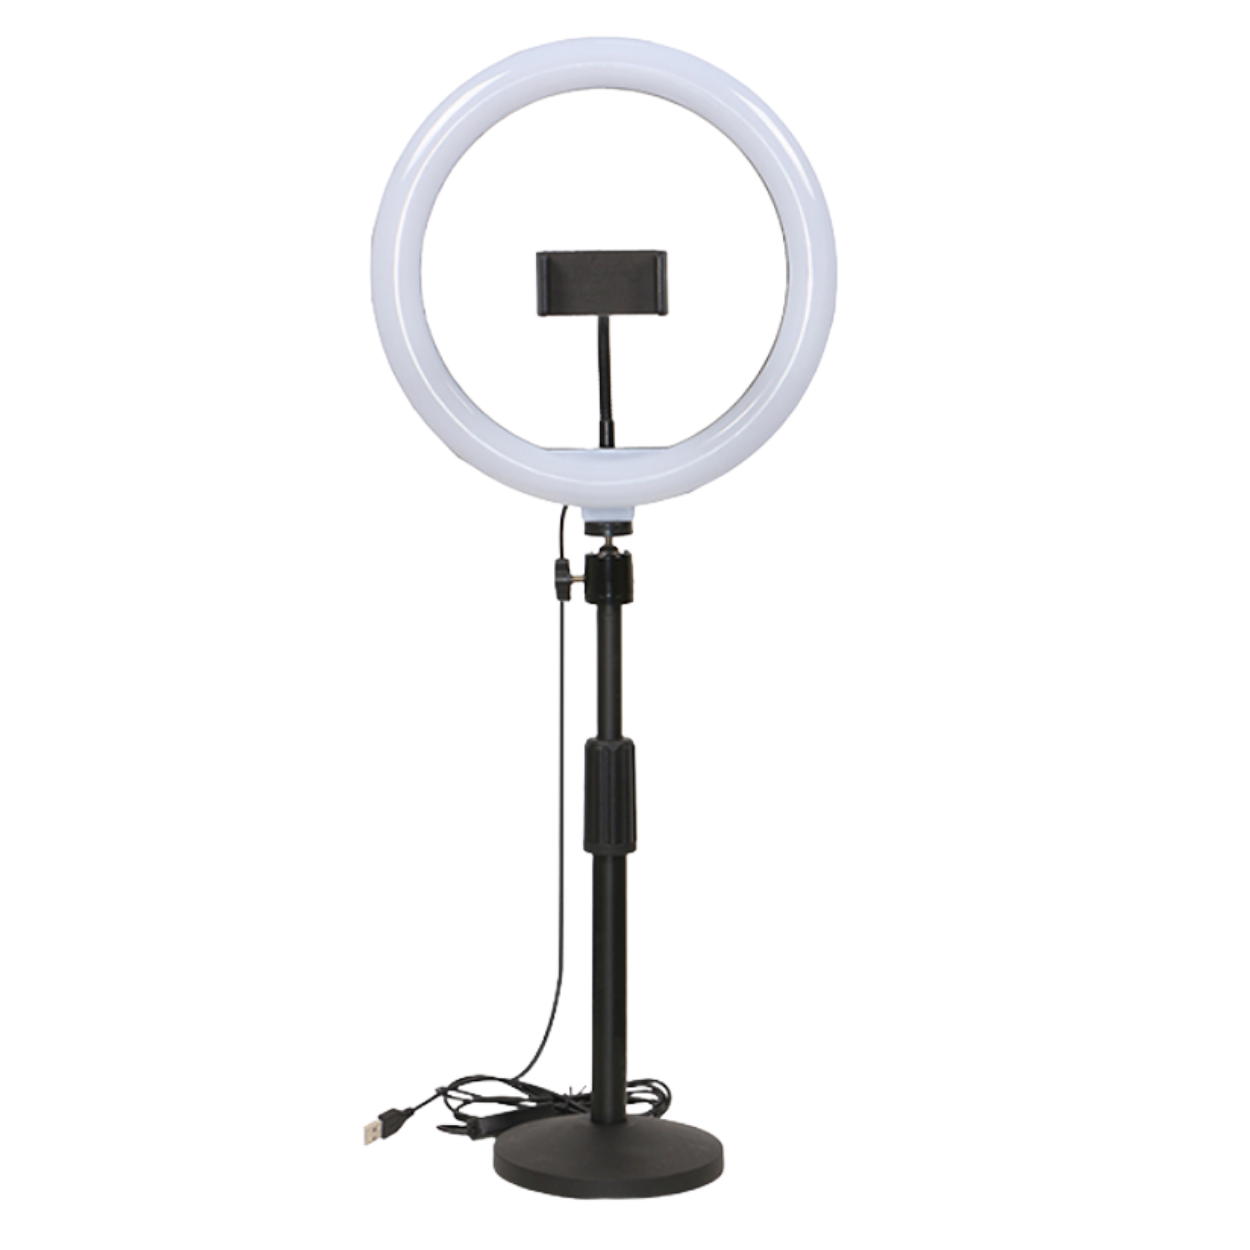 NEOWOOD BY-L205 LIVE STREAMING STAND (BEAUTY LAMP), NEOWOOD, STAND, neowood-stand-neo-by-l205, ZOSO MUSIC SDN BHD